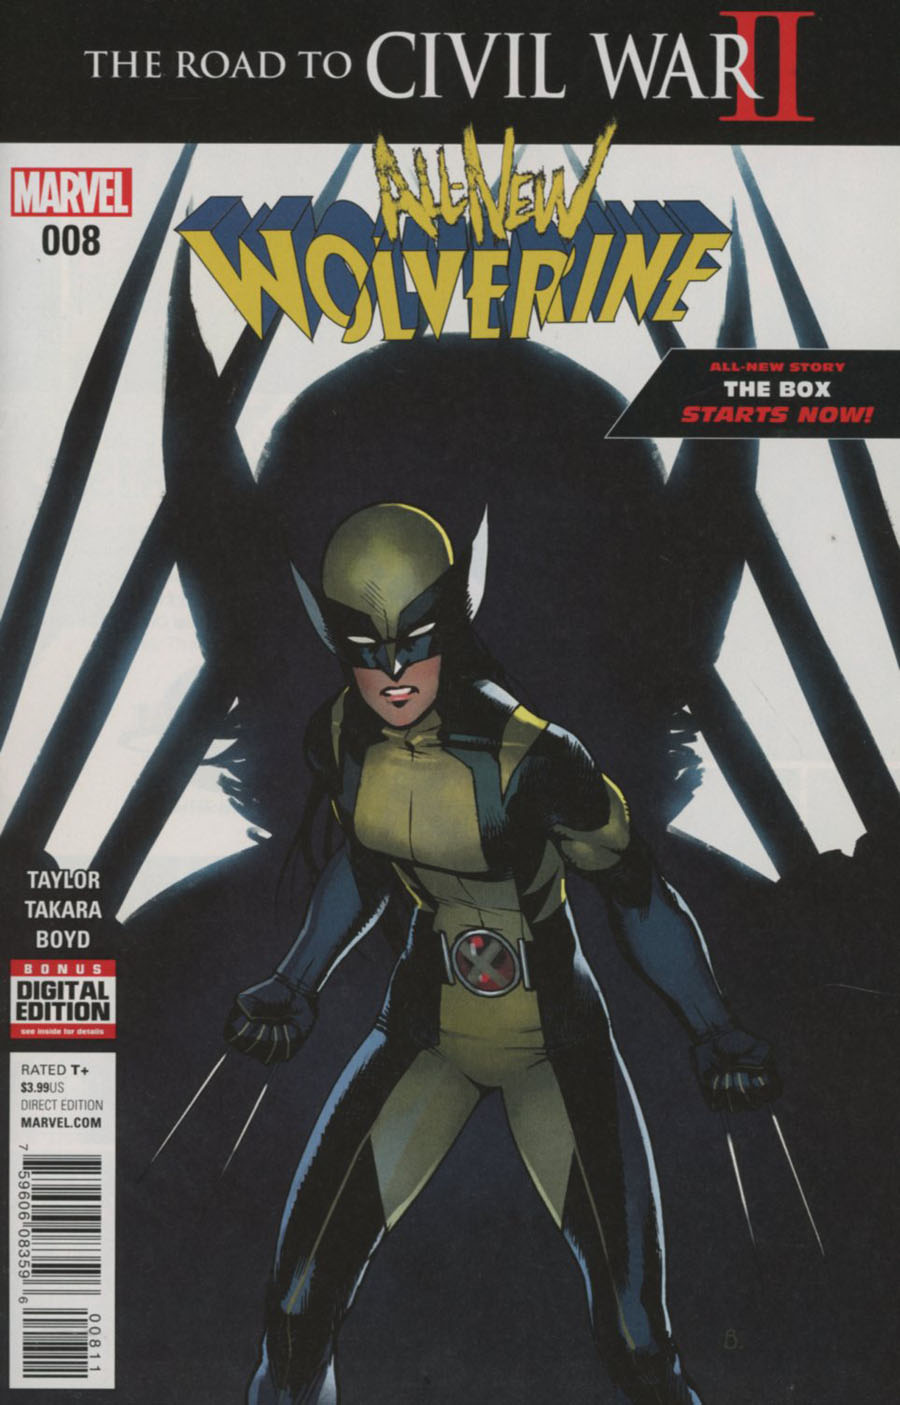 All-New Wolverine #8 (Road To Civil War II Tie-In)